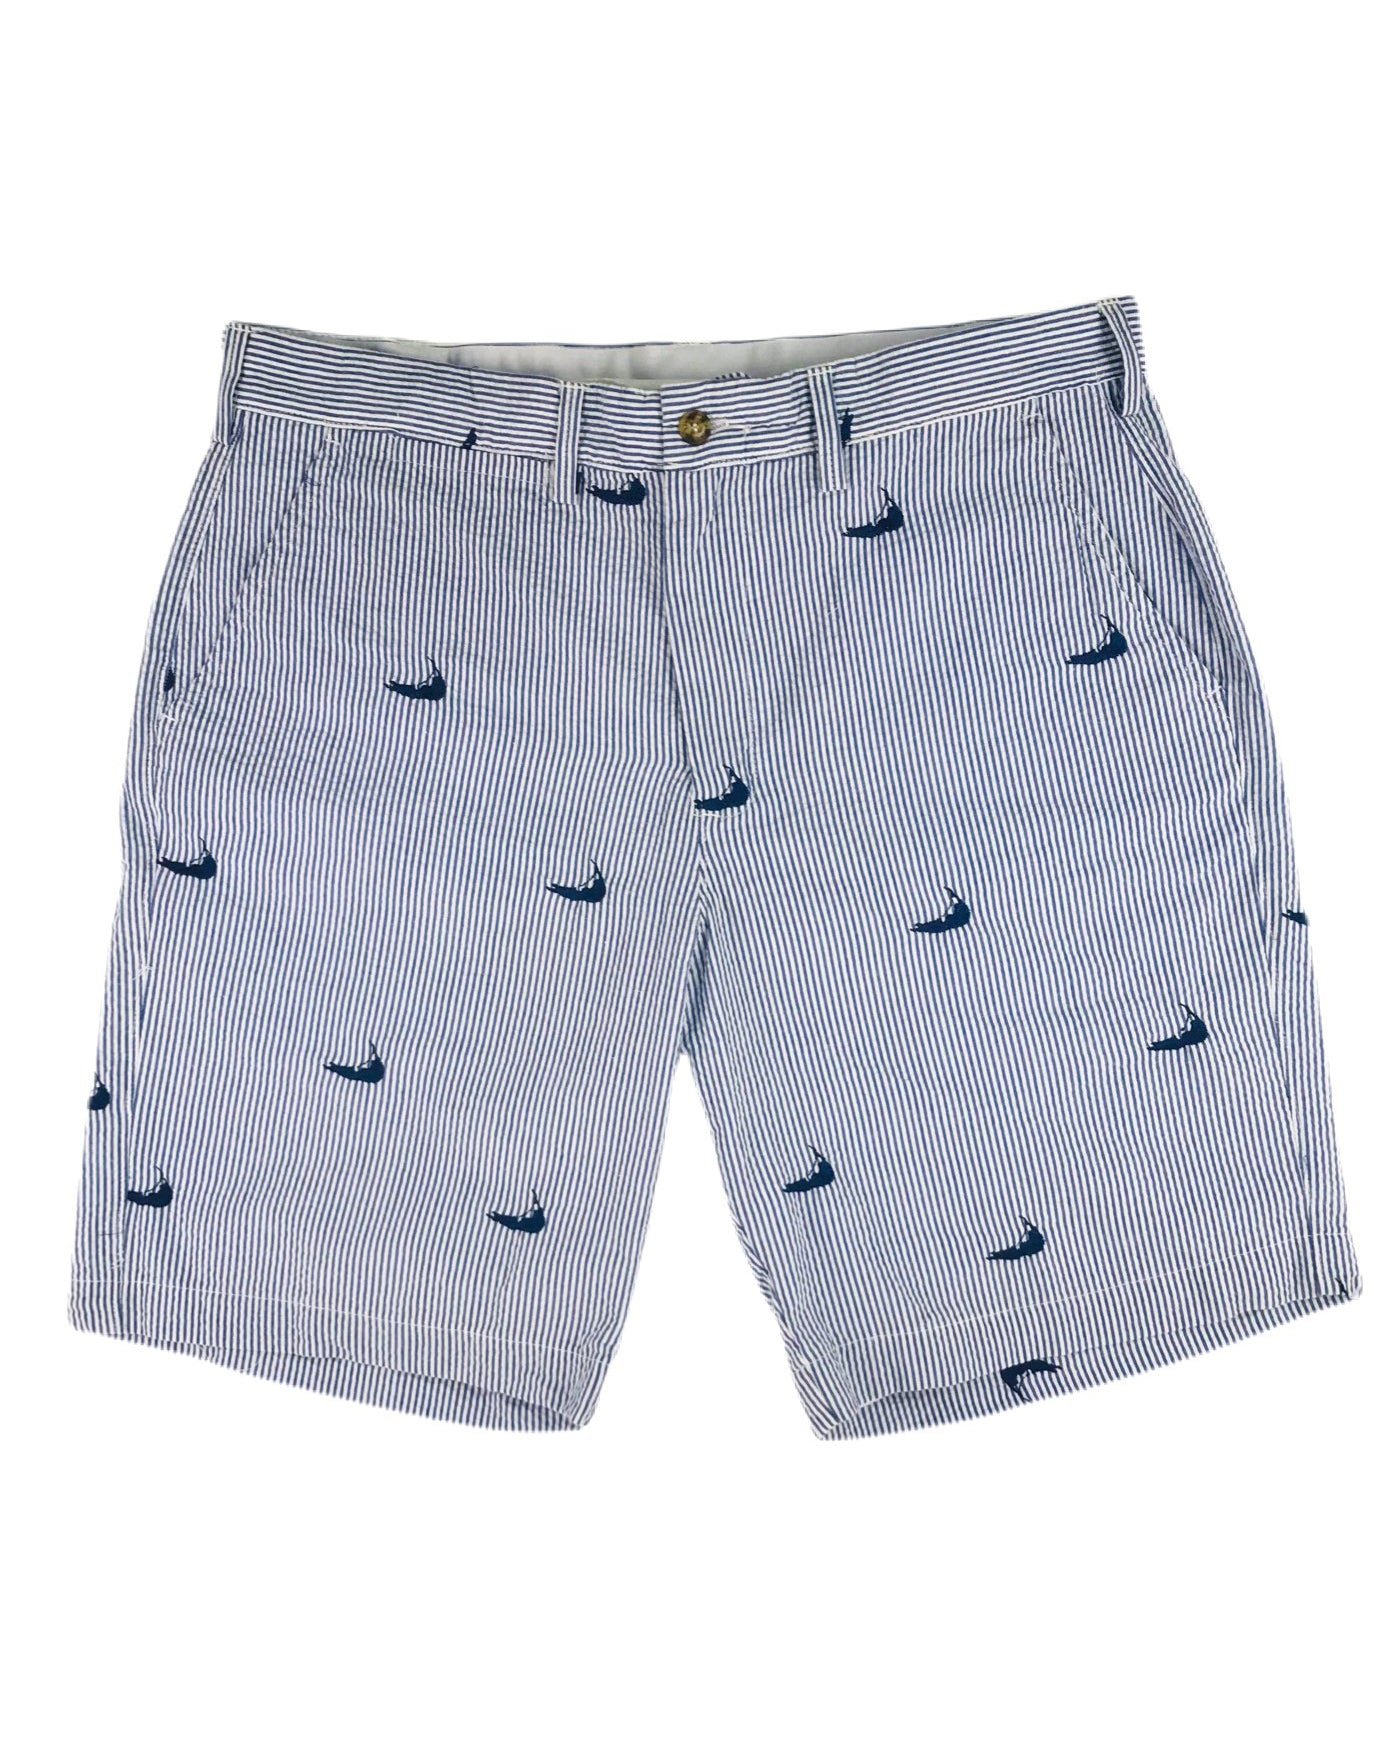 Blue Mens Seersucker Shorts with Navy Embroidered Nantuckets